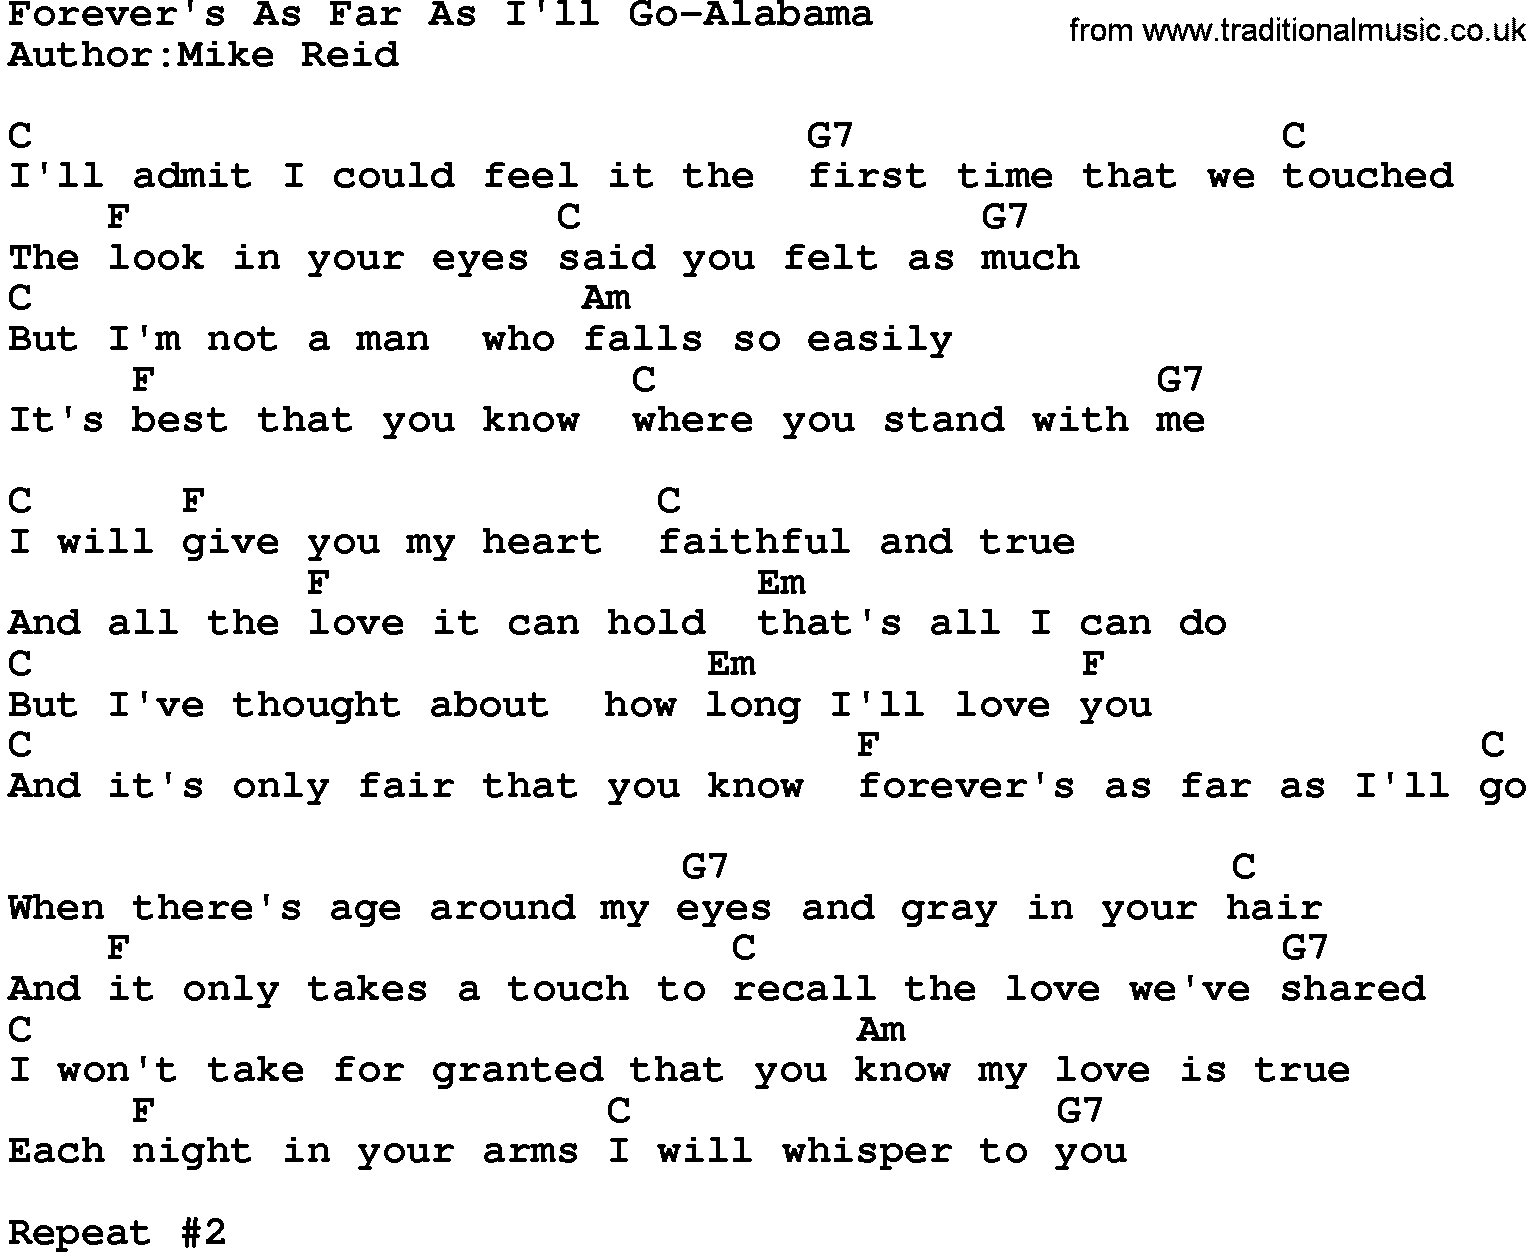 Country music song: Forever's As Far As I'll Go-Alabama lyrics and chords